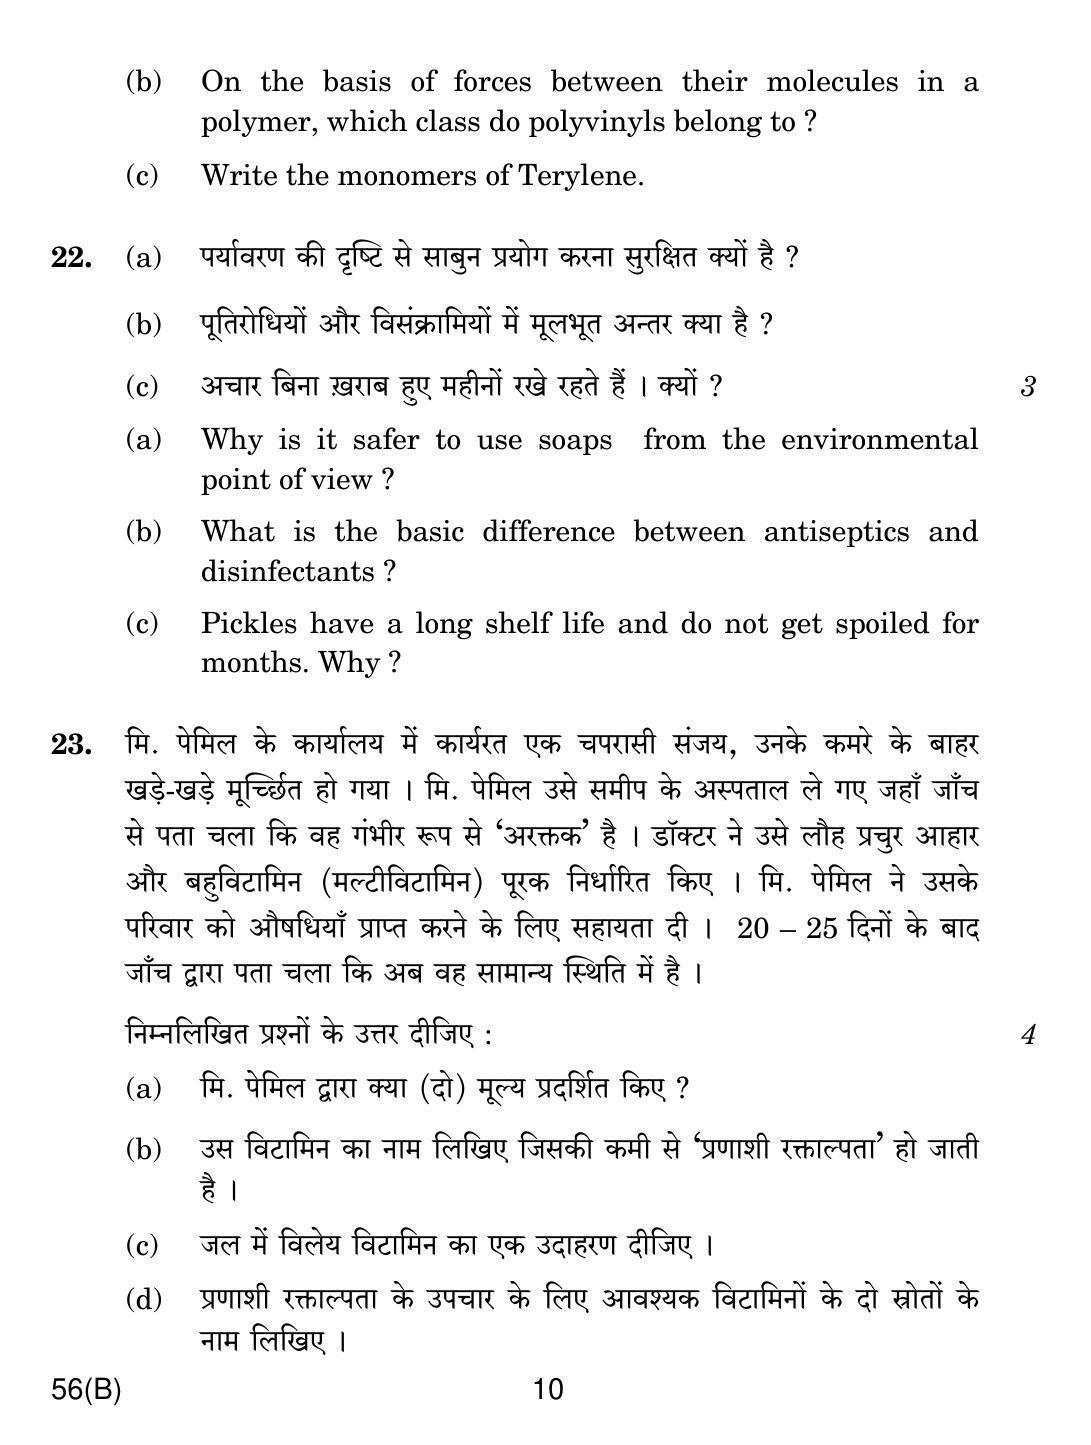 CBSE Class 12 56(B) CHEMISTRY FOR BLIND CANDIDATES 2018 Question Paper - Page 10